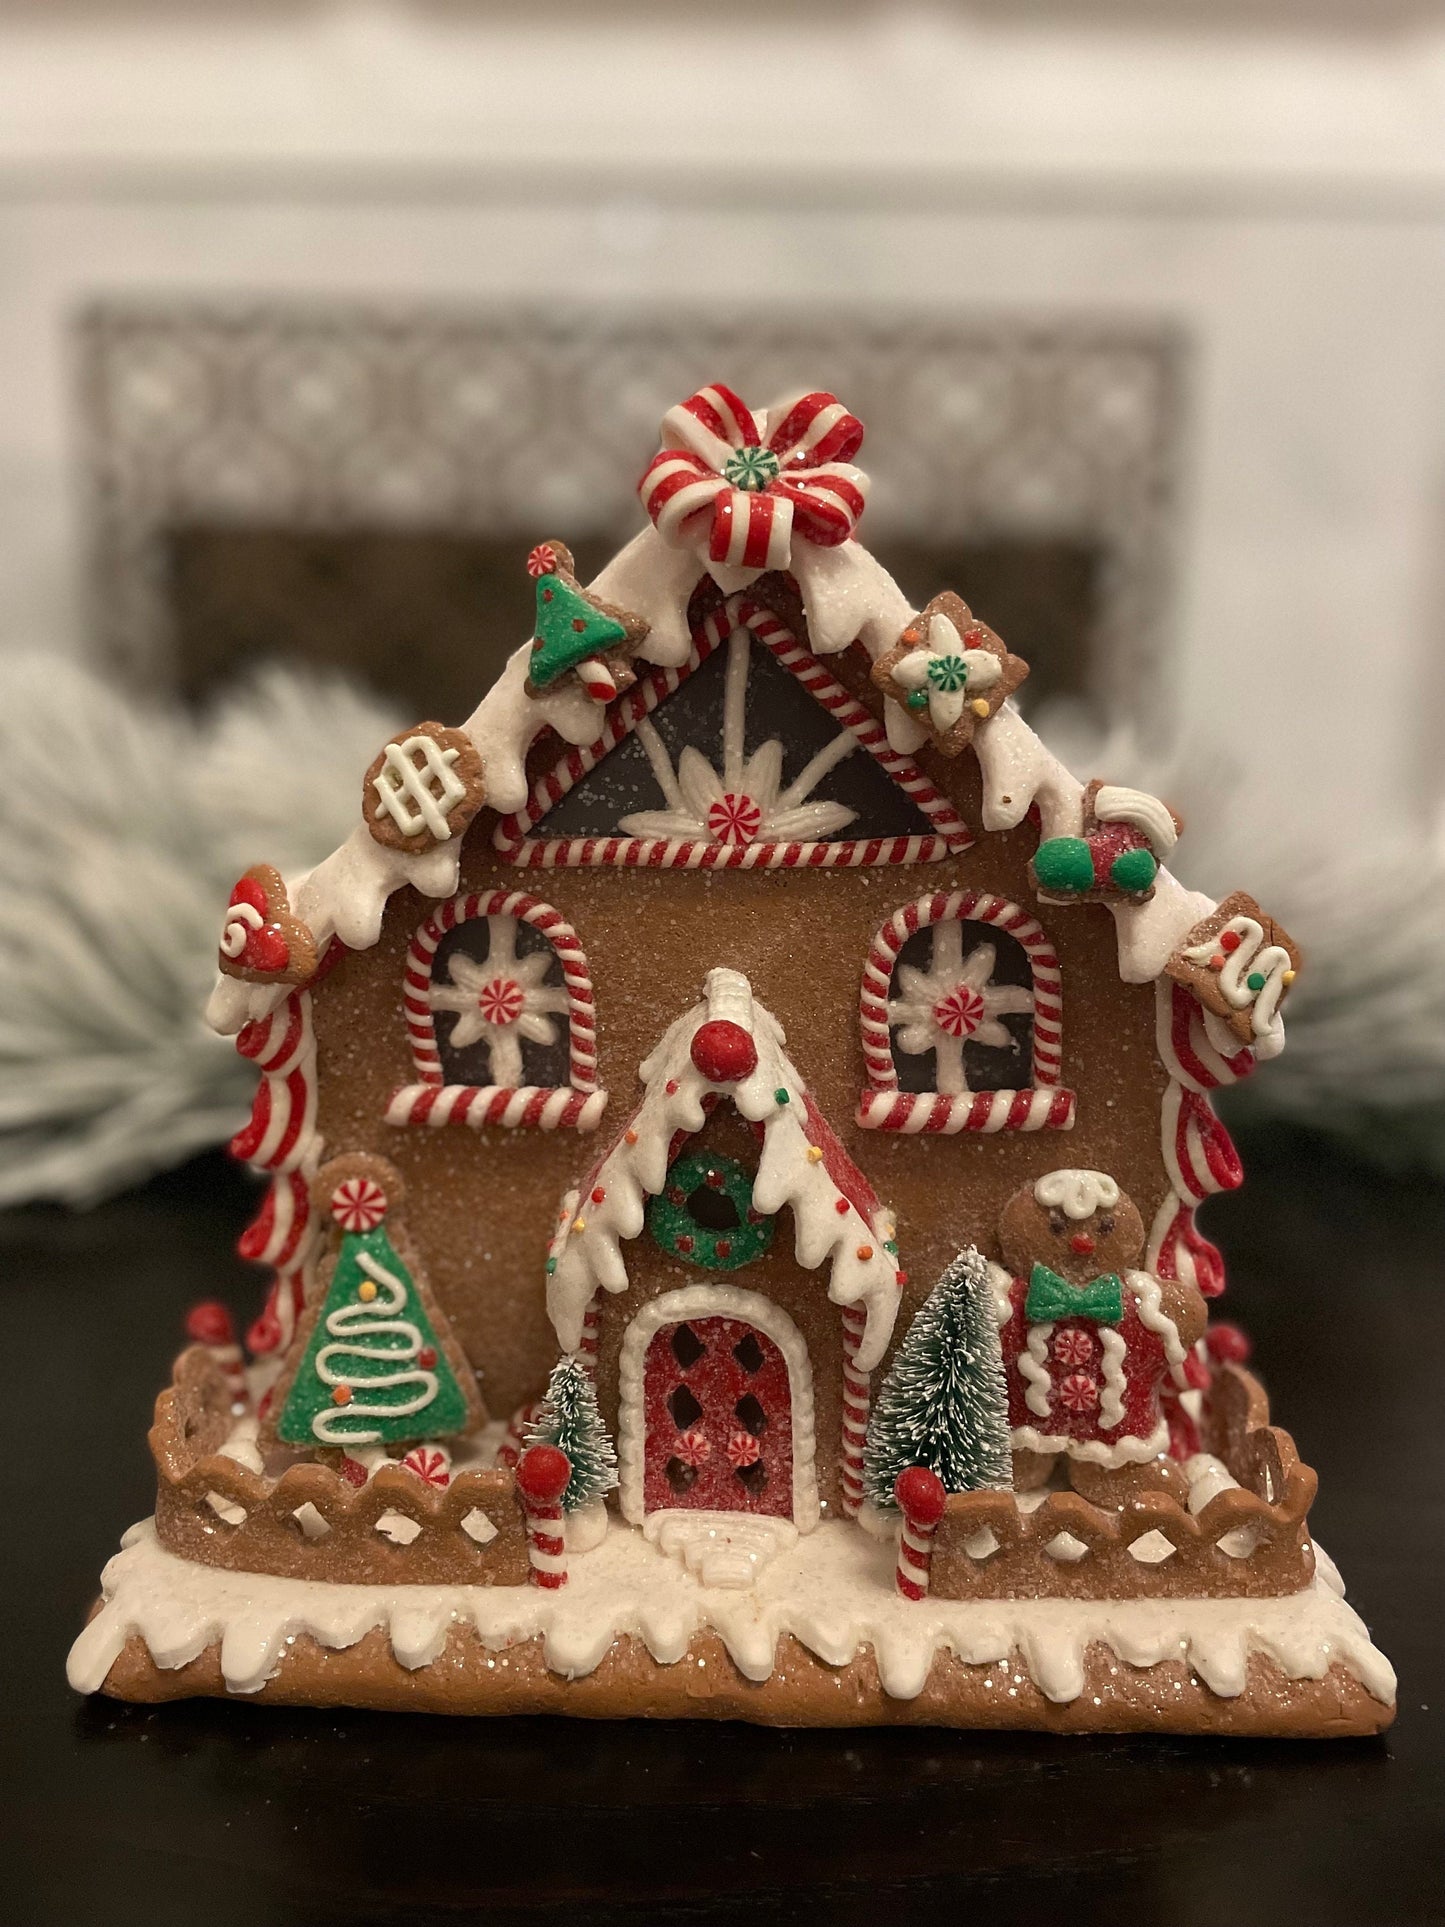 9”H Gingerbread lighted house.